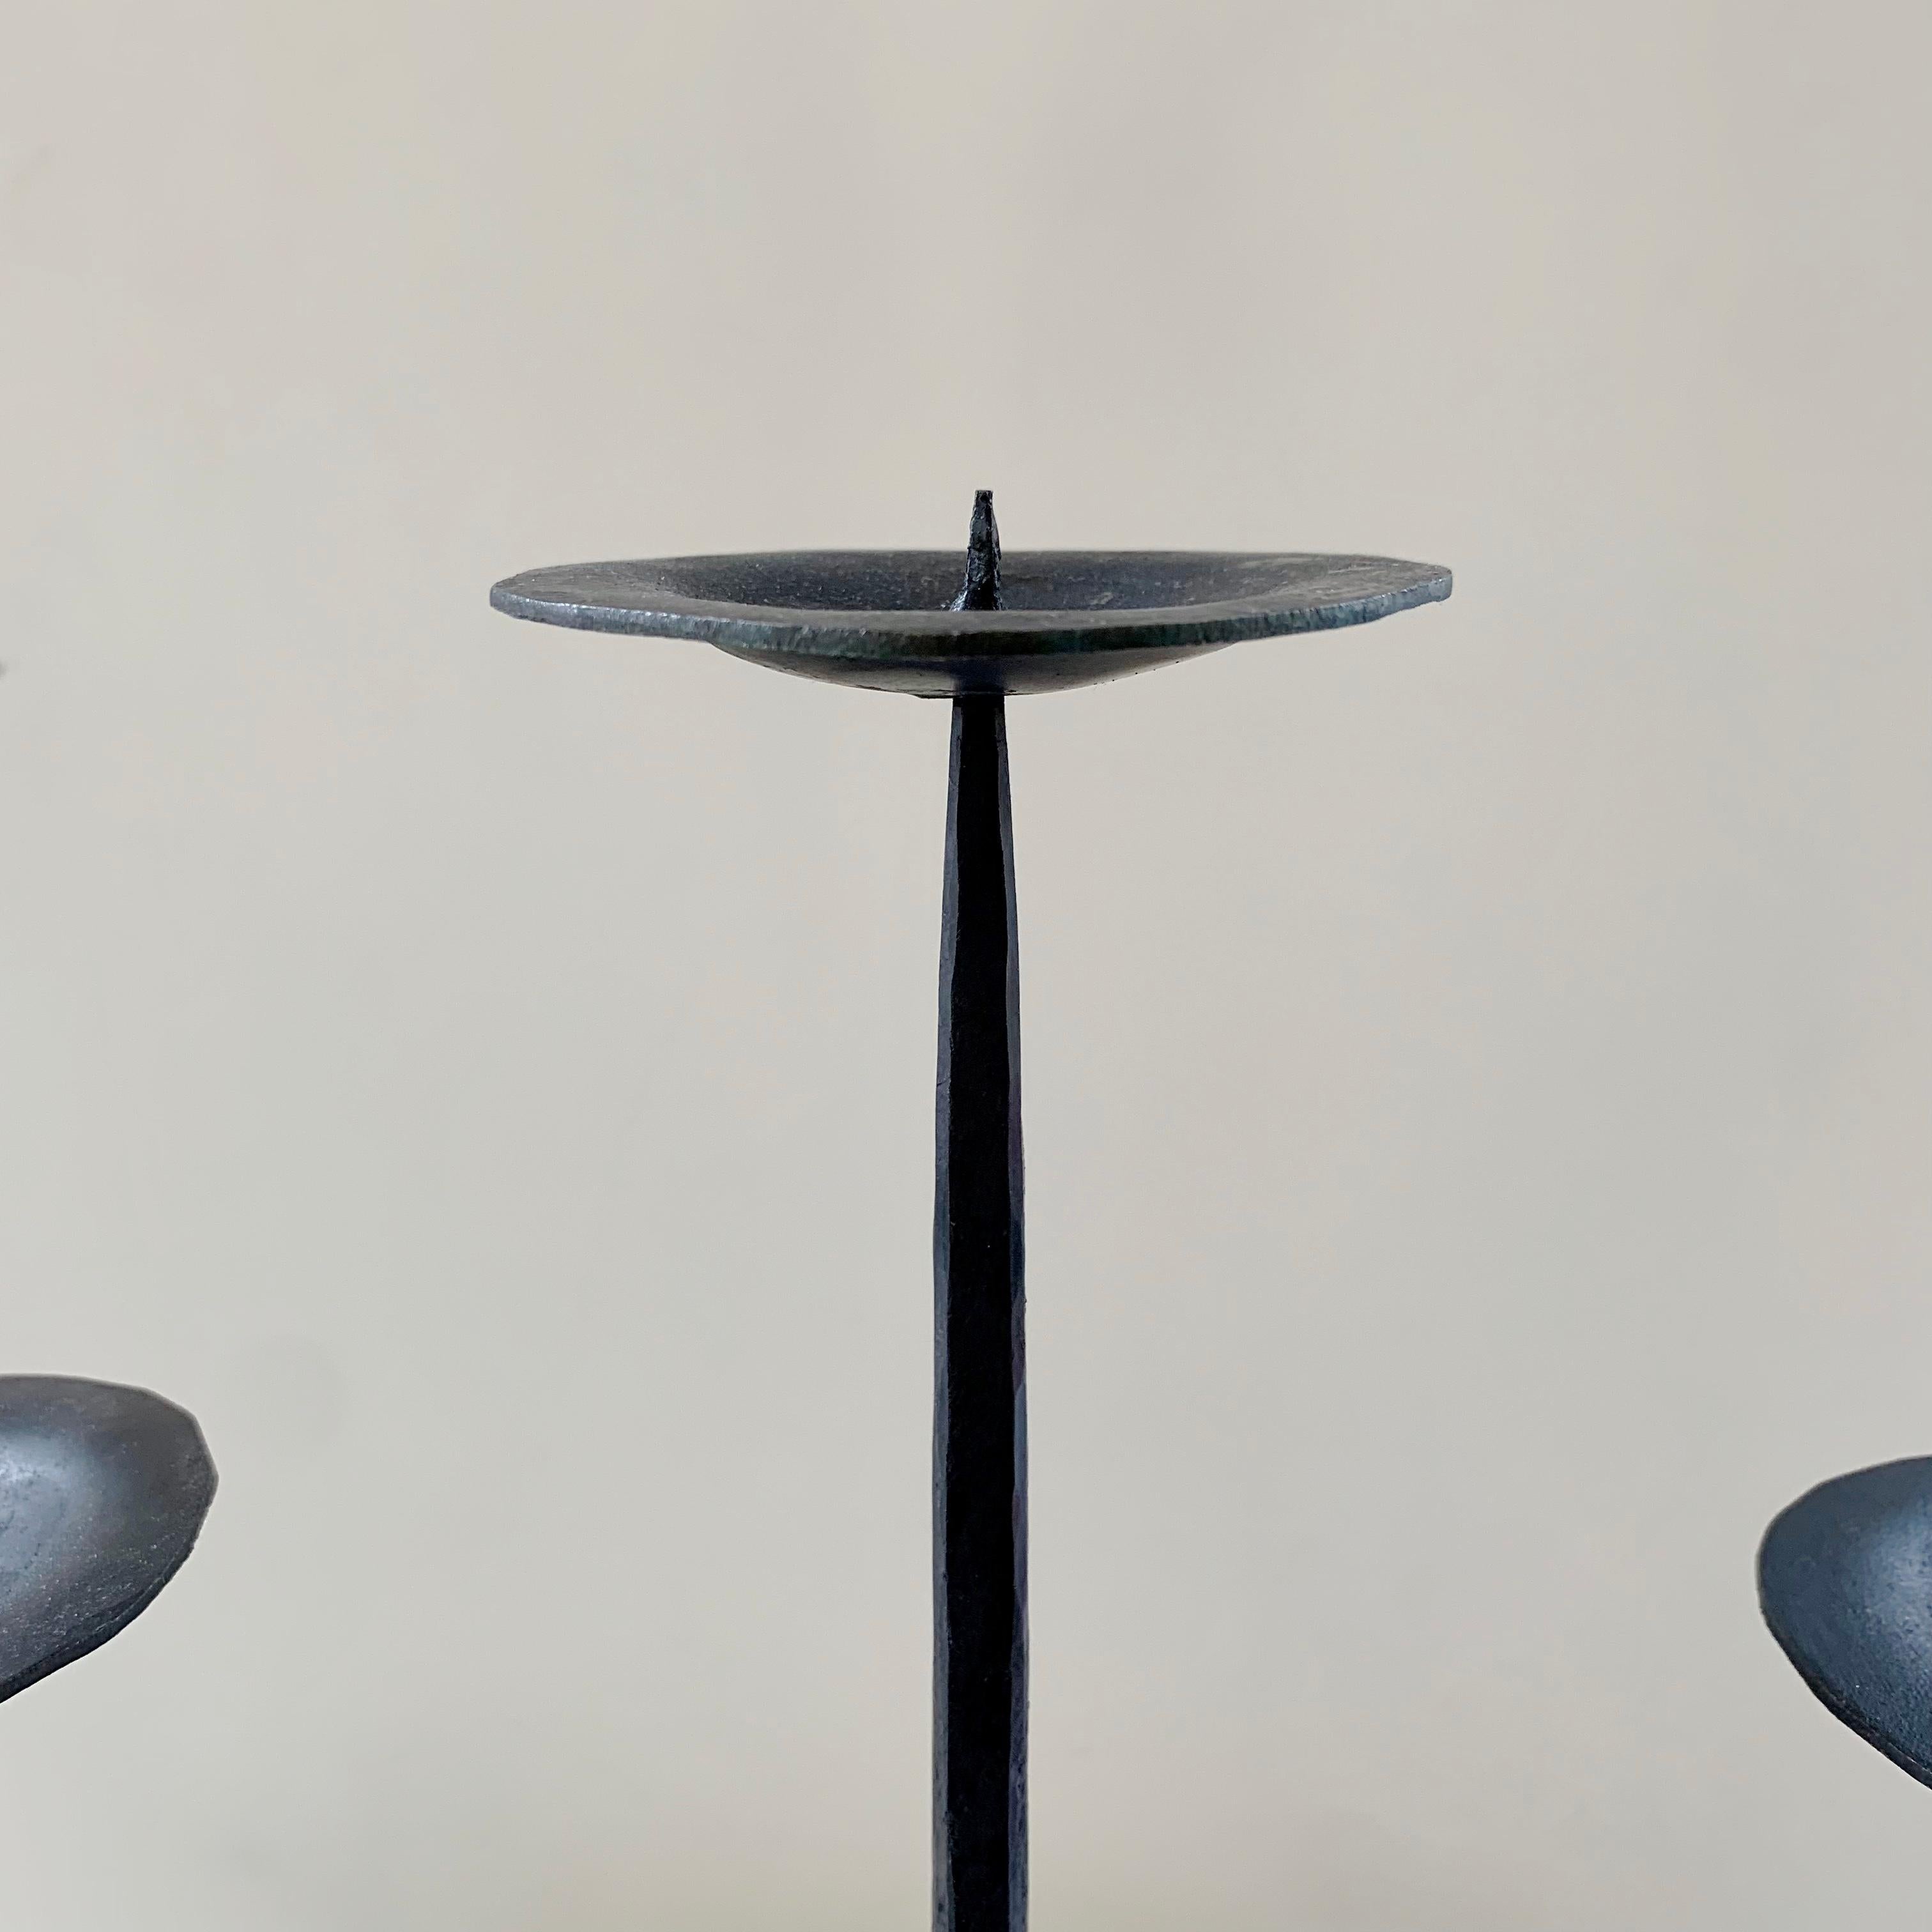 Mid-20th Century Wrought Iron Candlestick in the Style of Ateliers de Marolles, France c.1950 For Sale